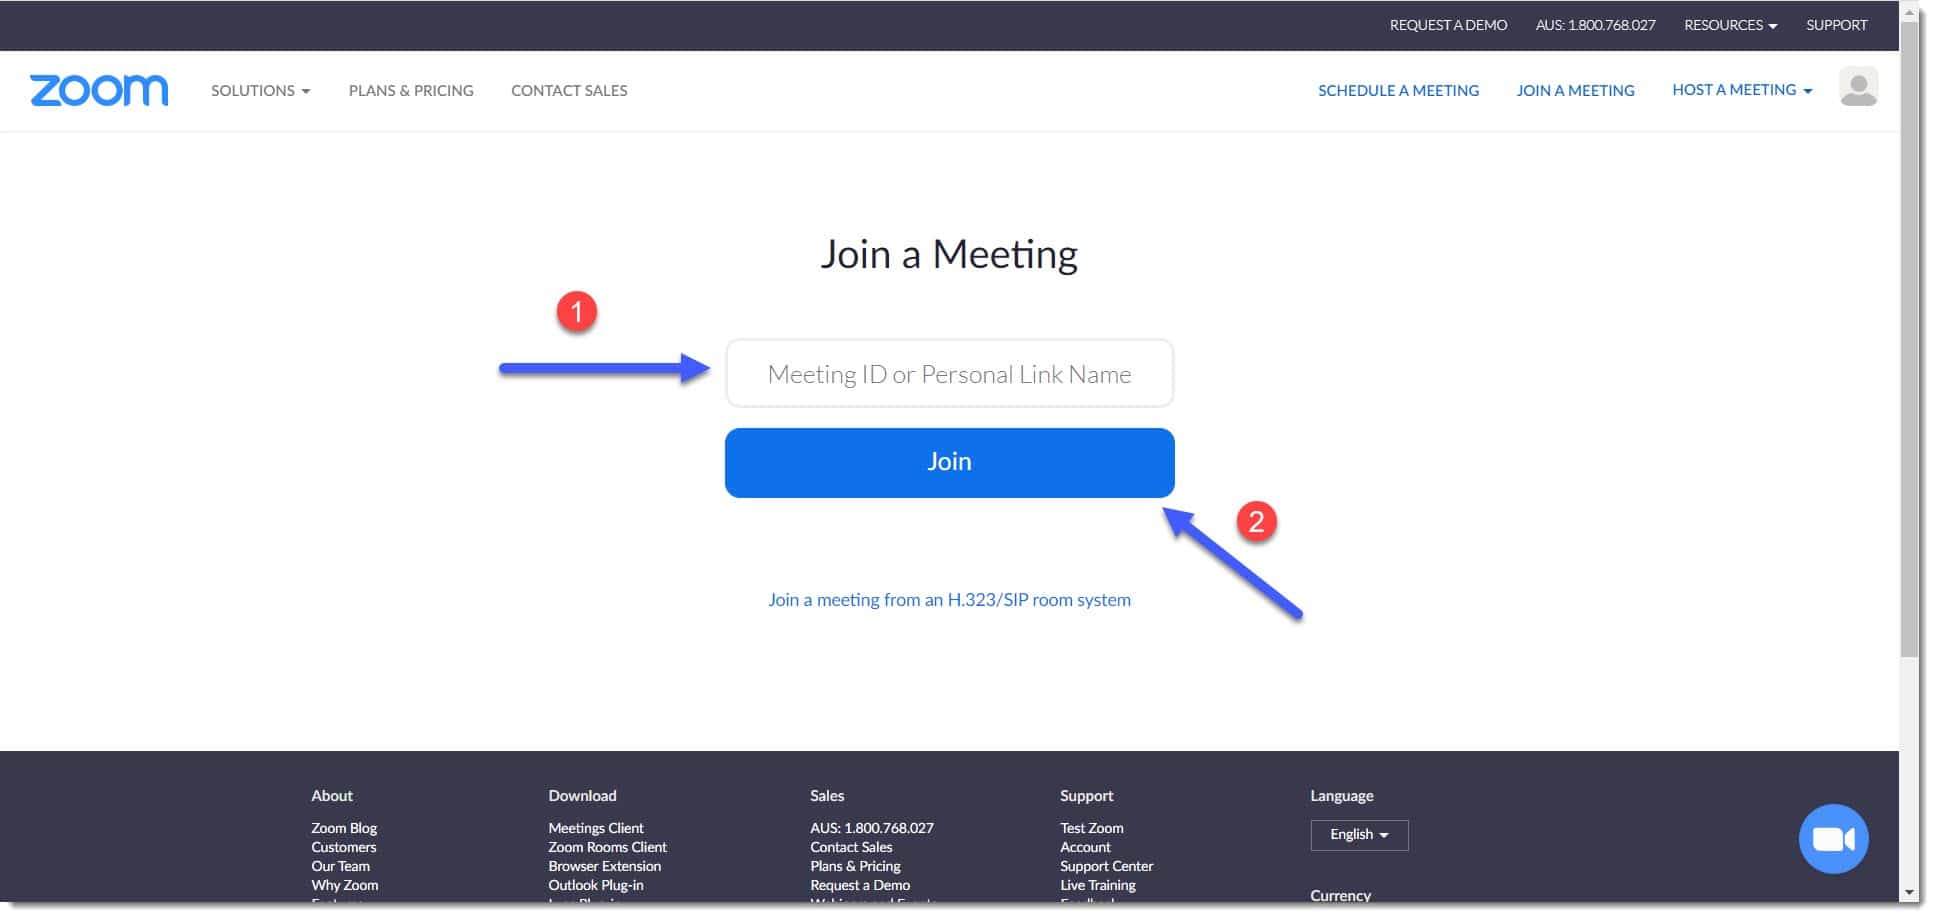 how to change zoom meeting id for only 1 meeting and not al